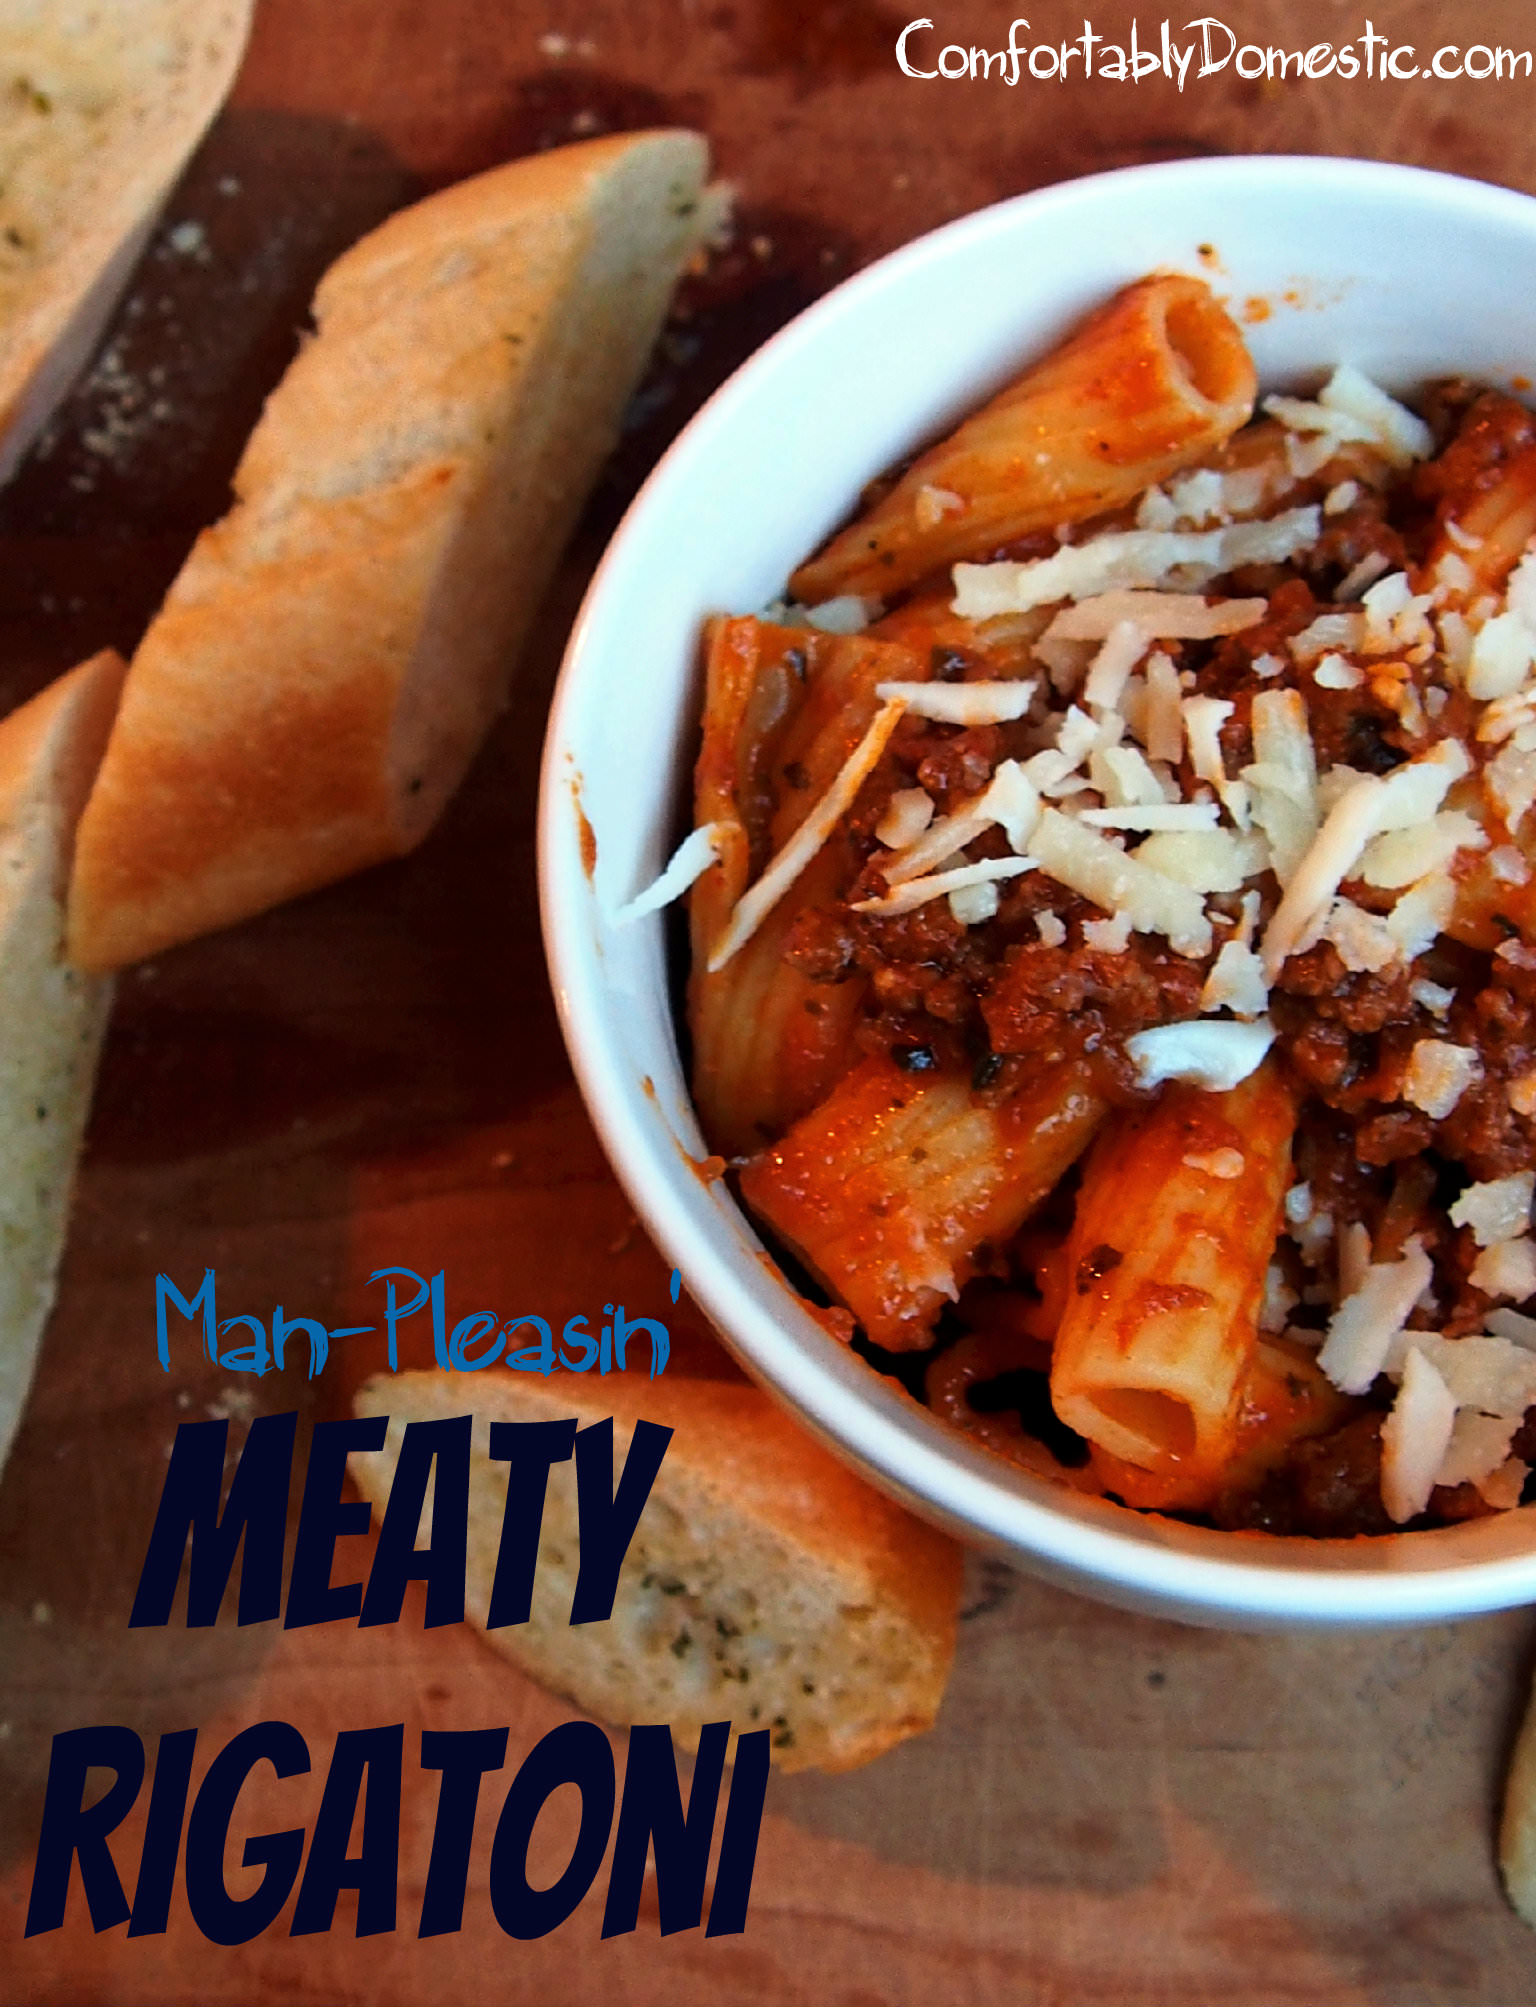 Meat lover's rigatoni is hearty, stick-to-your-ribs pasta with meat sauce that’s ready in a flash, and is sure to satisfy even the most ferocious of appetites. | ComfortablyDomestic.com